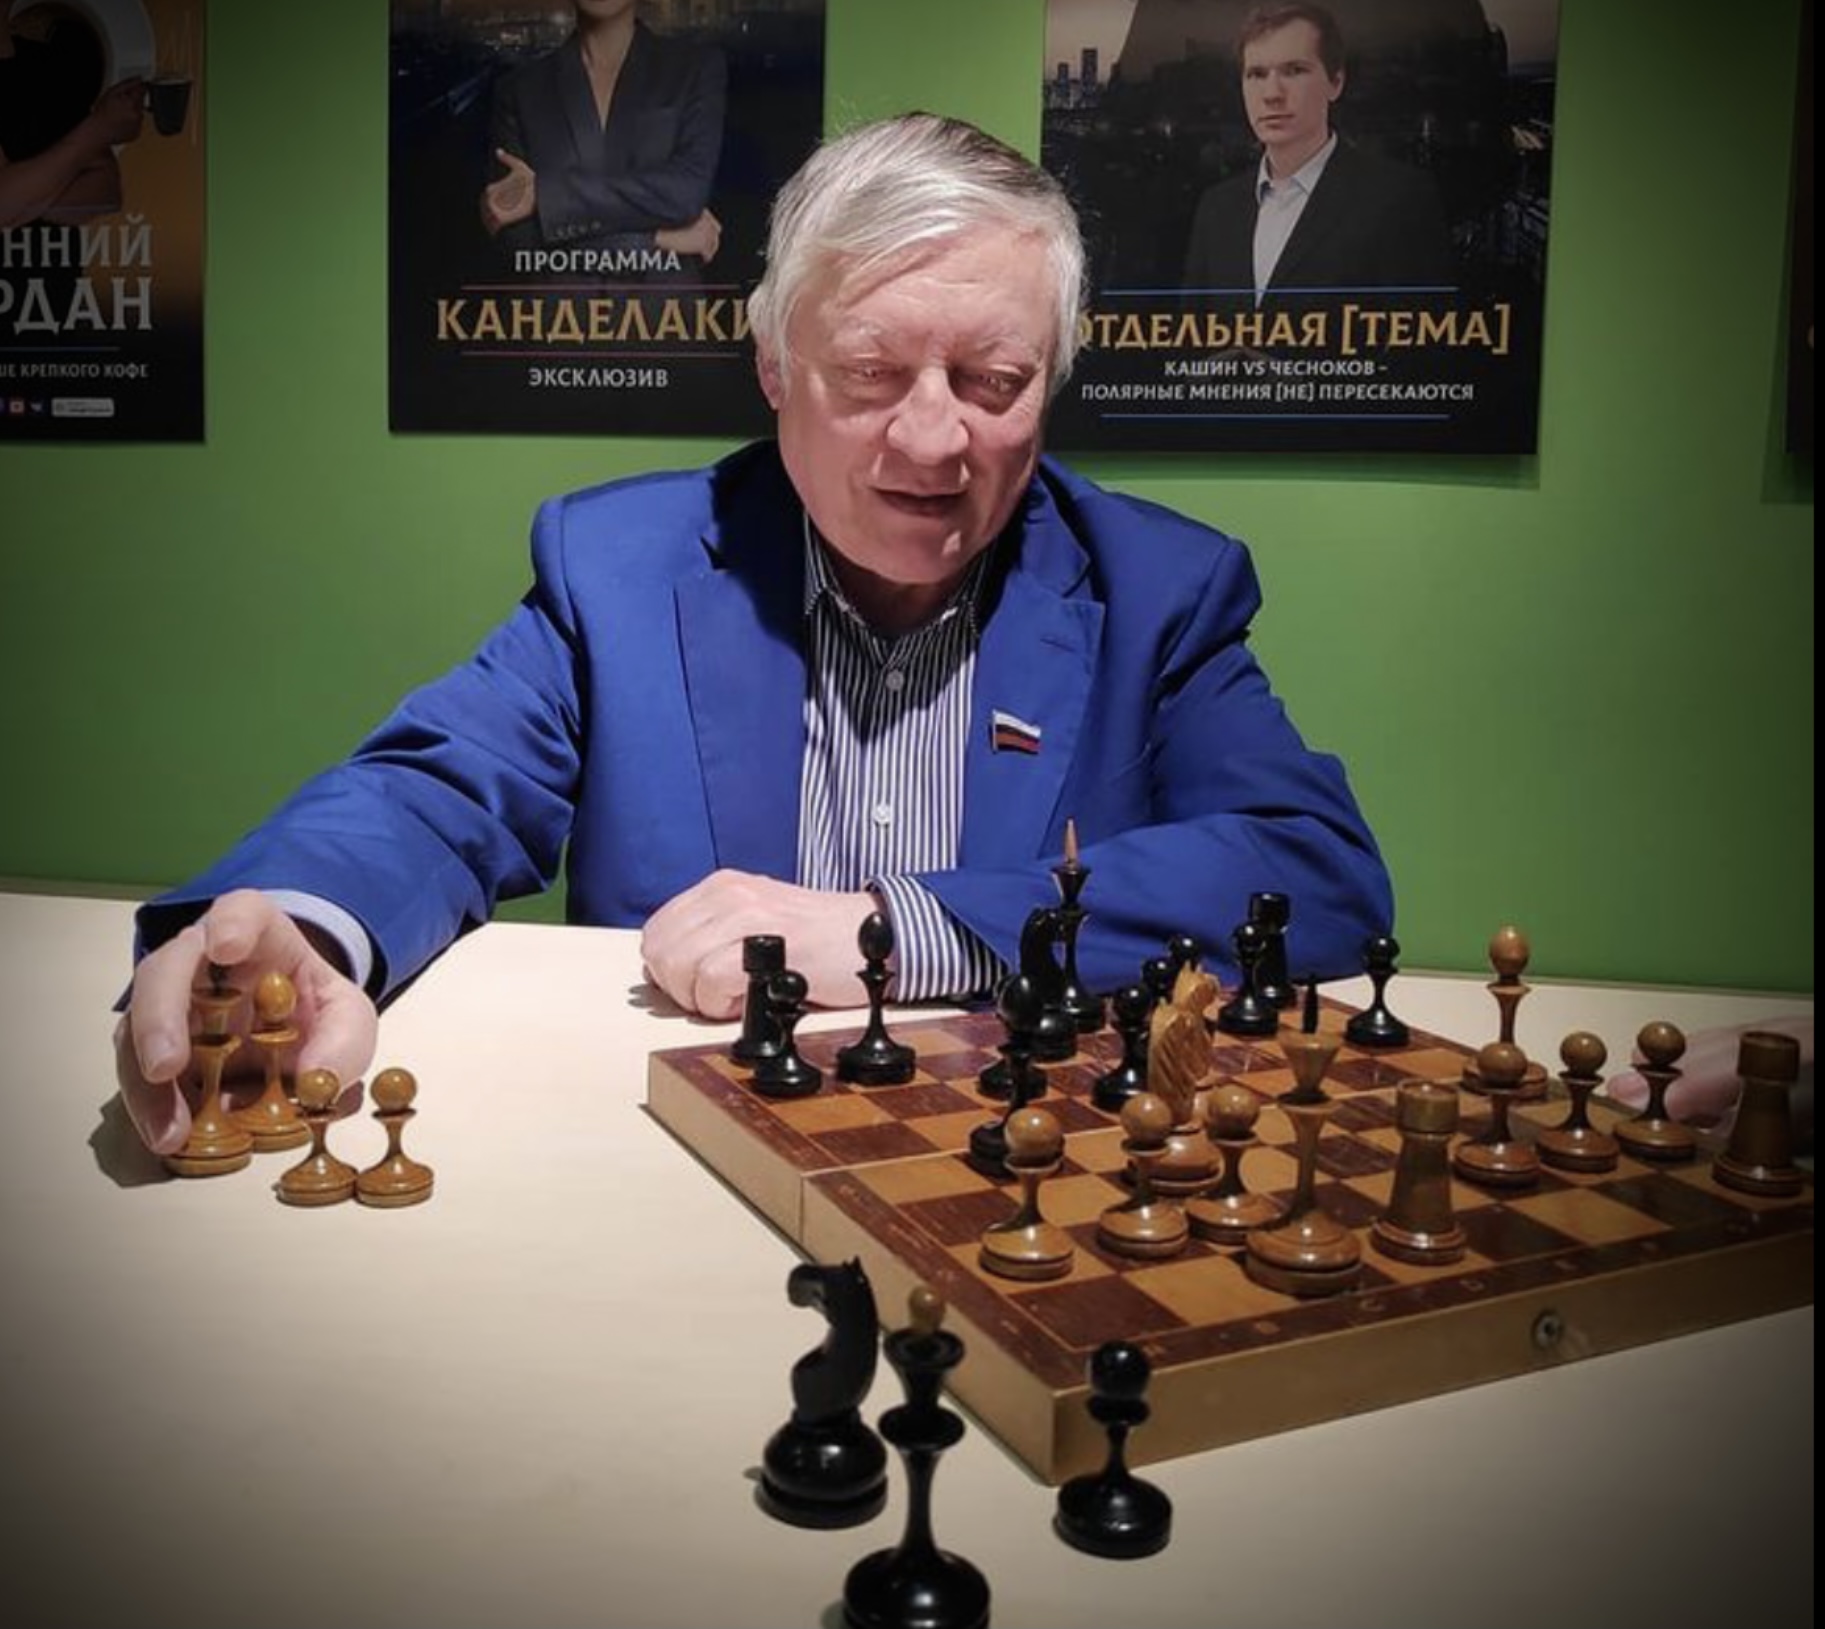 Anatoly Karpov Chess Products  The Life, Chess Games and Products